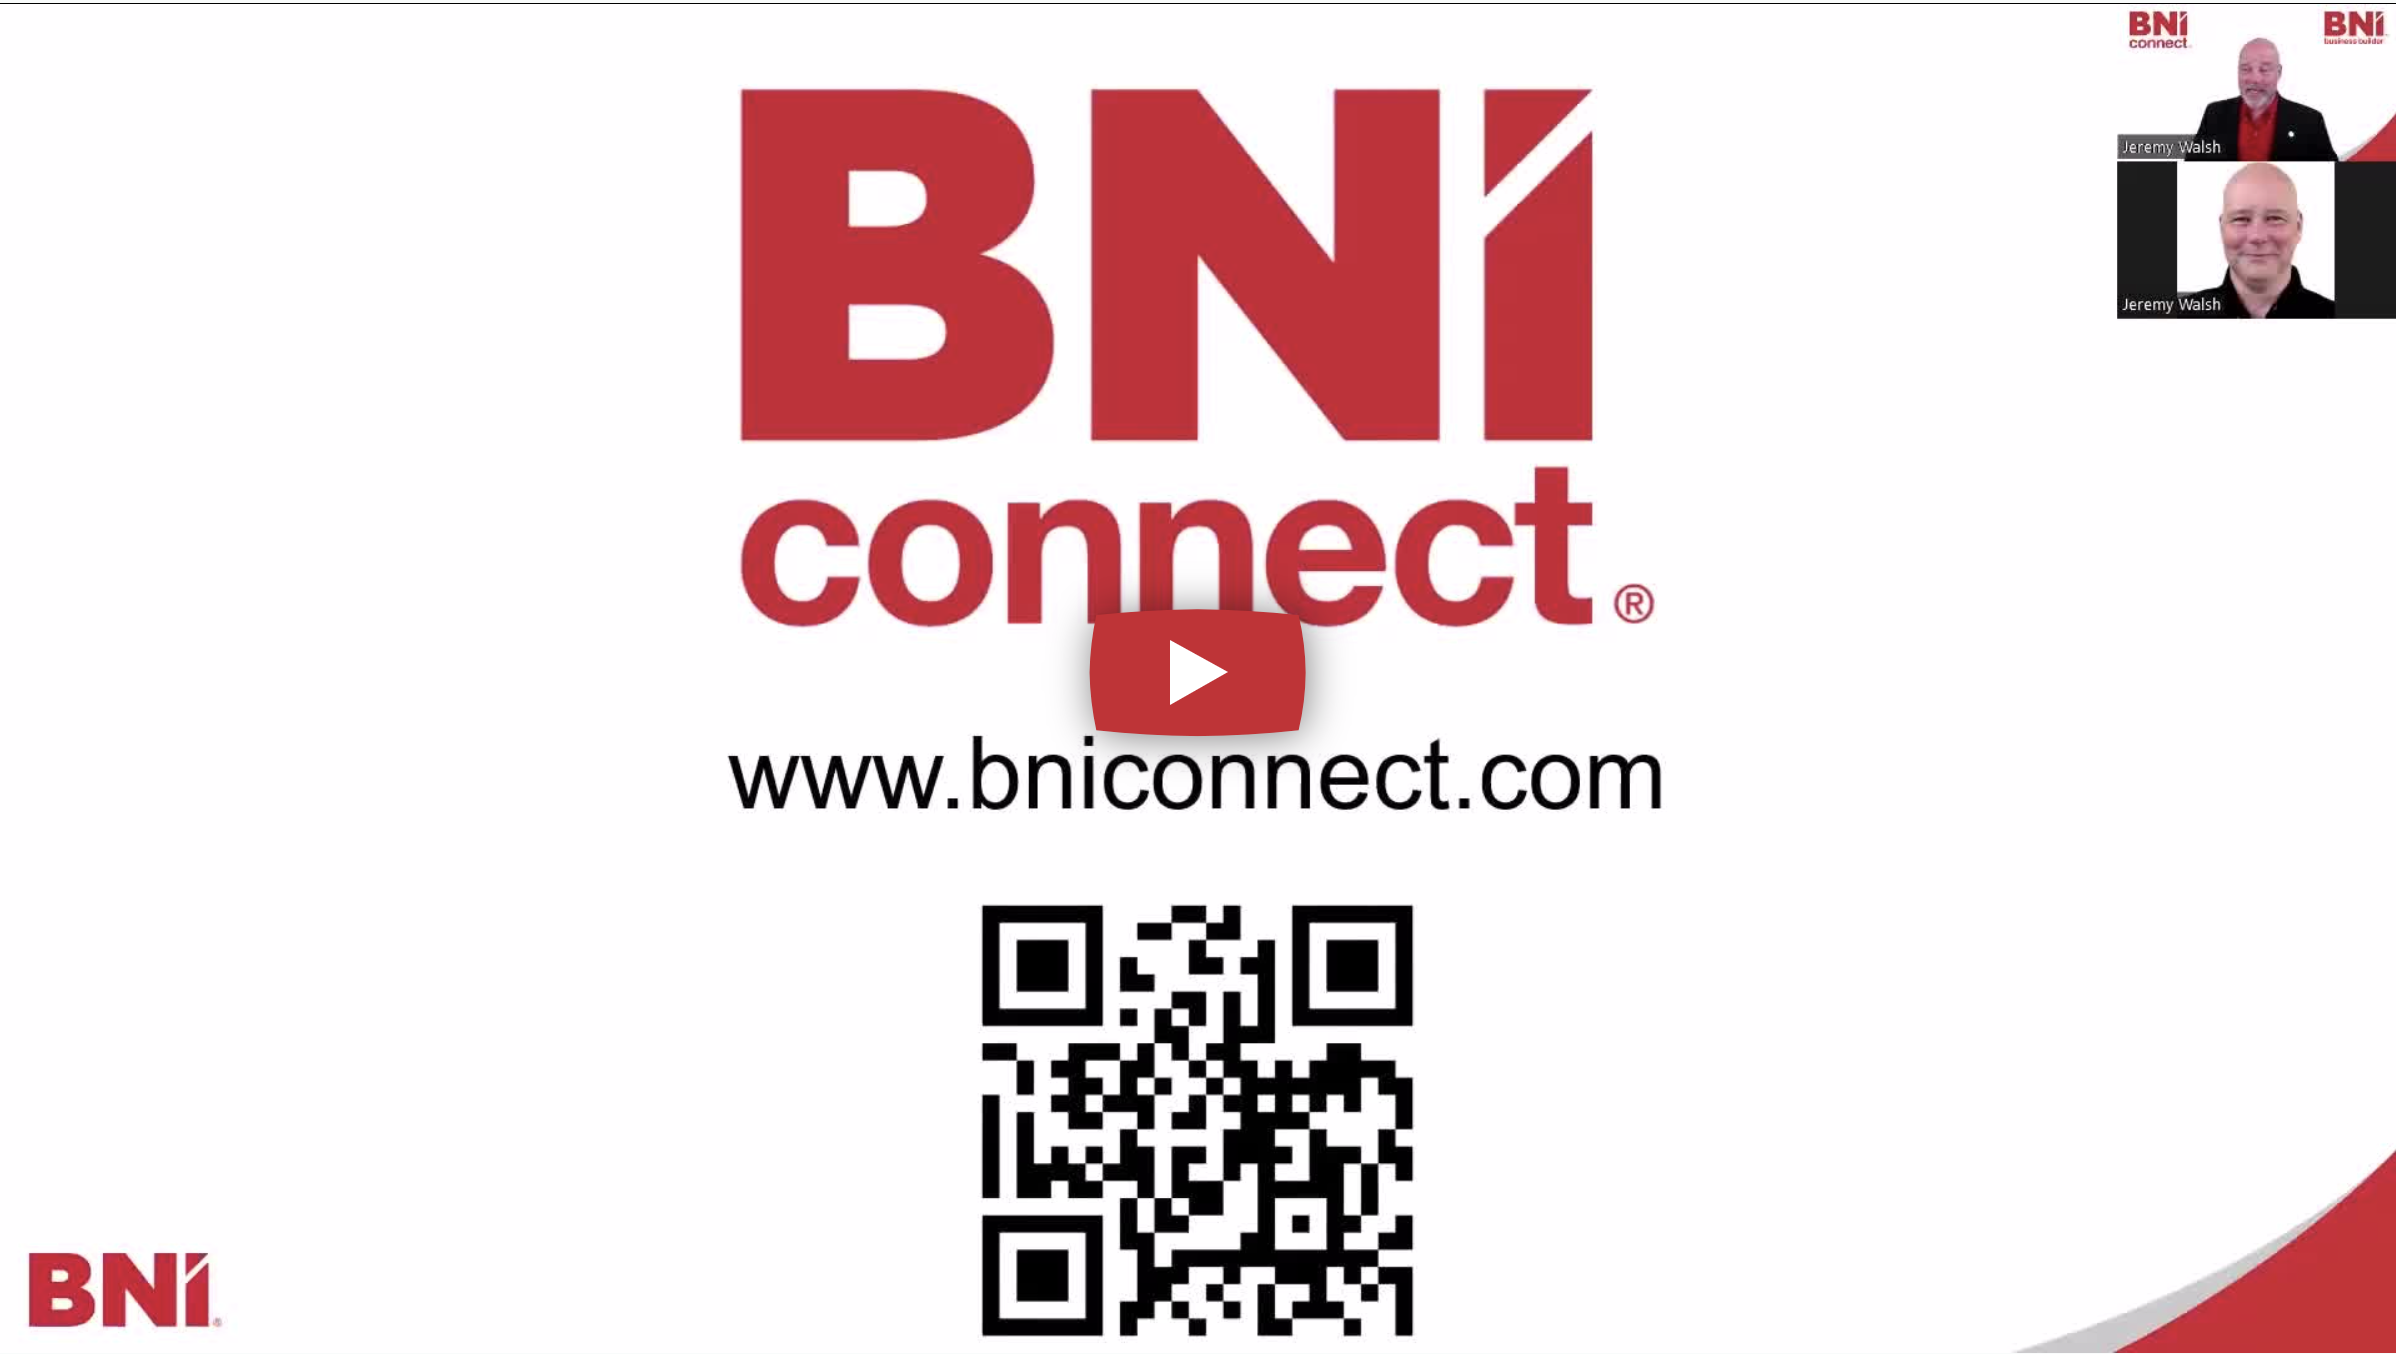 Getting connected to your online BNI tools BNI Connect and BNI Business Builder